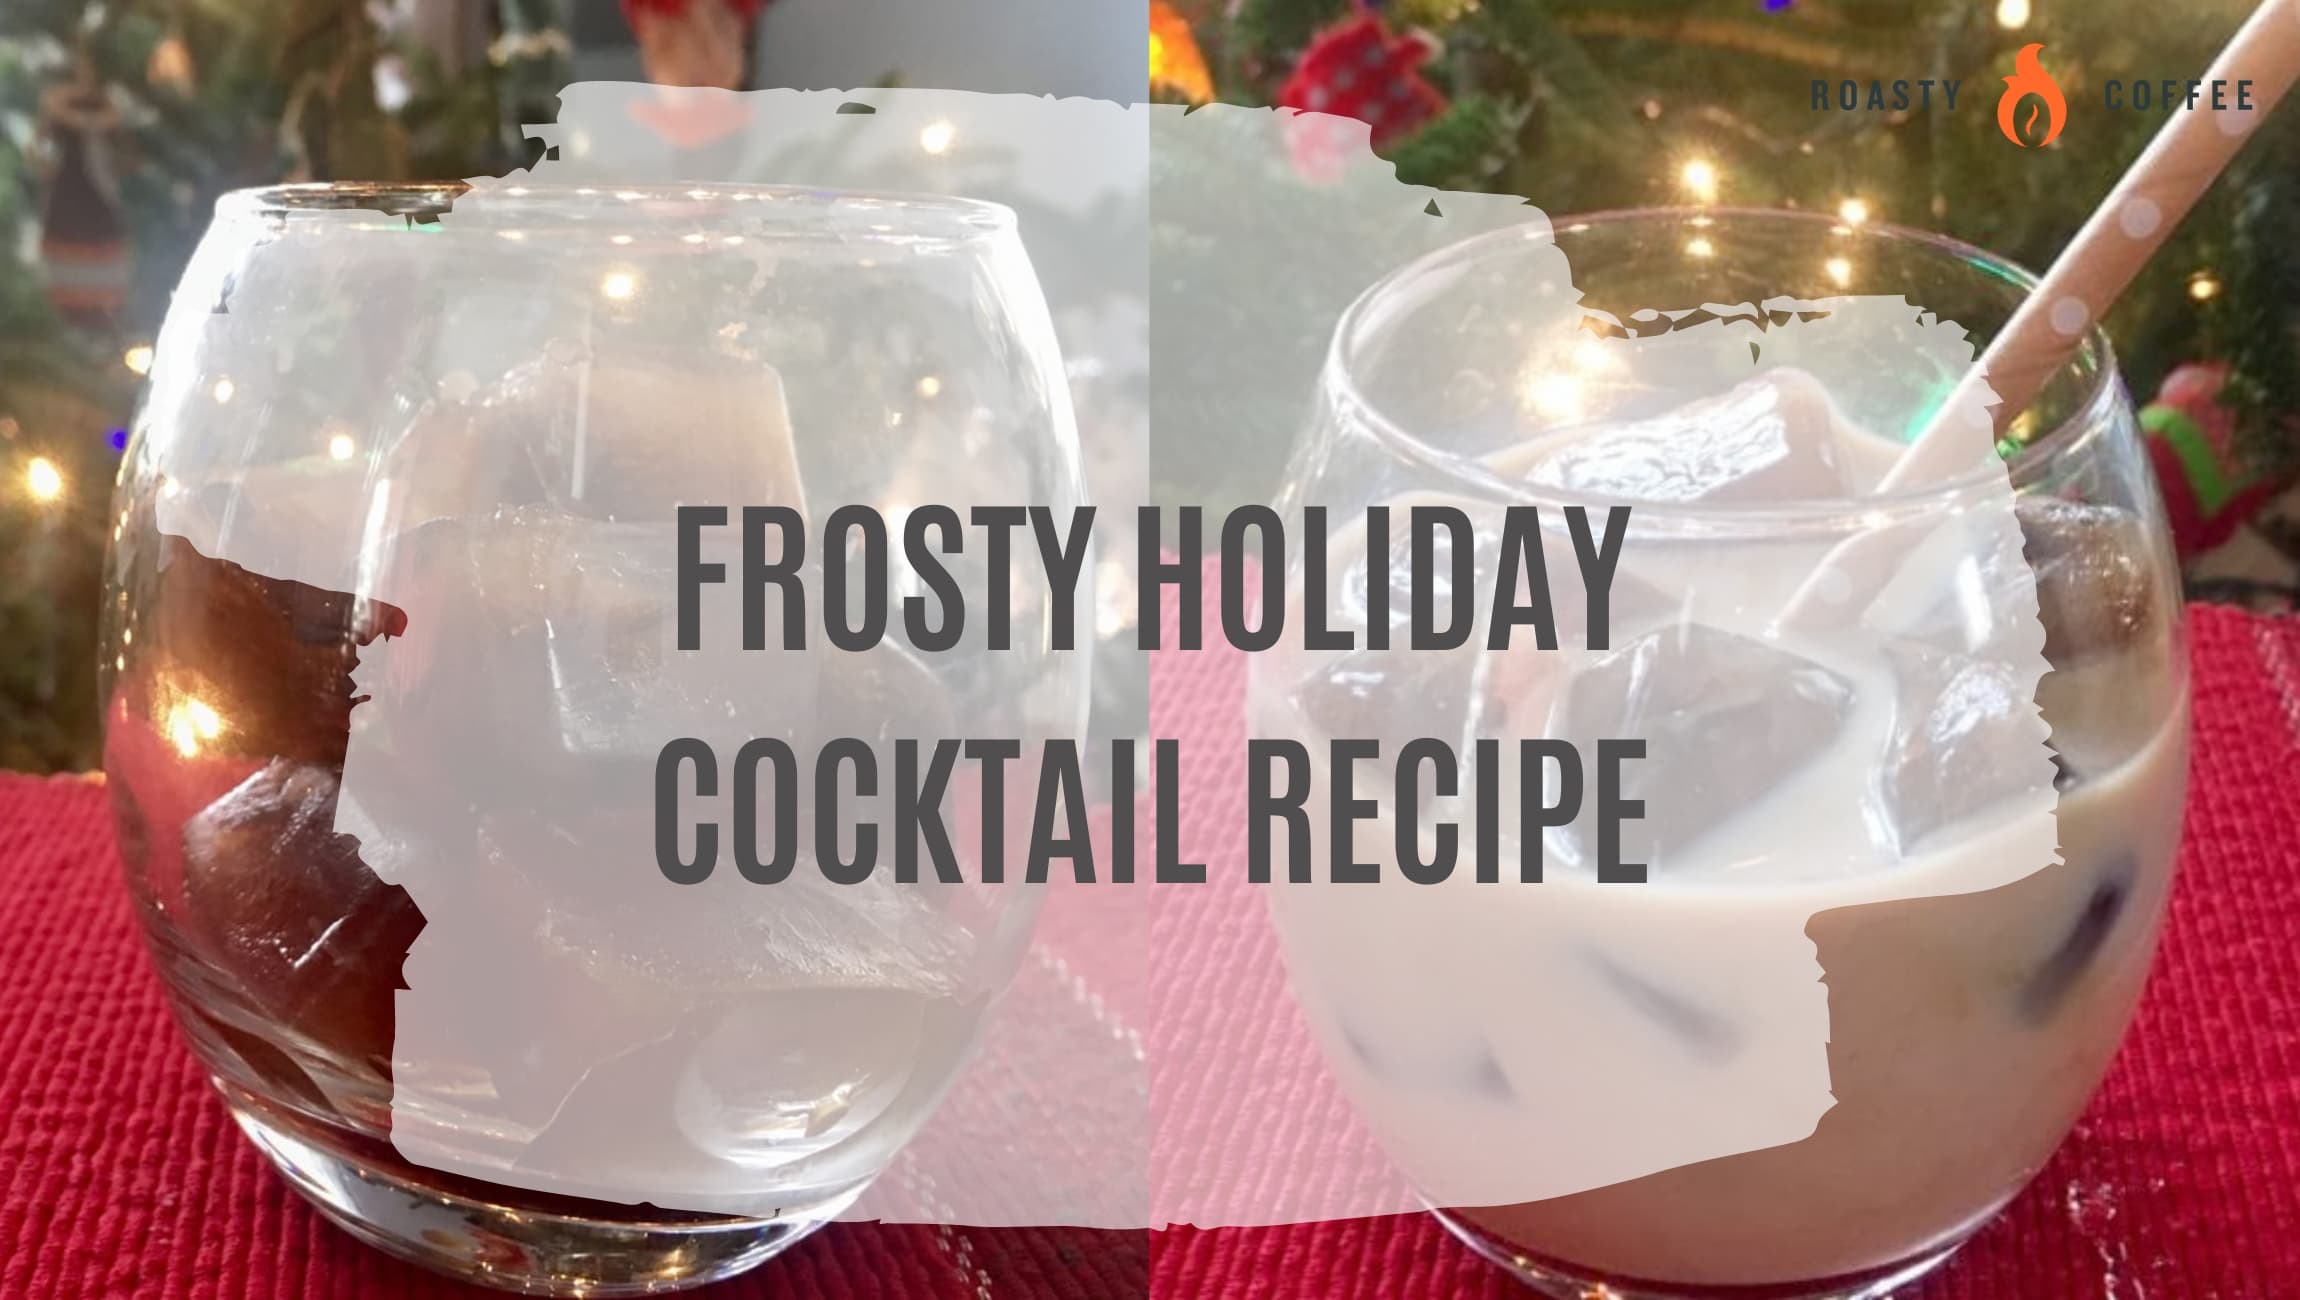 Frosty Holiday Cocktail Recipe